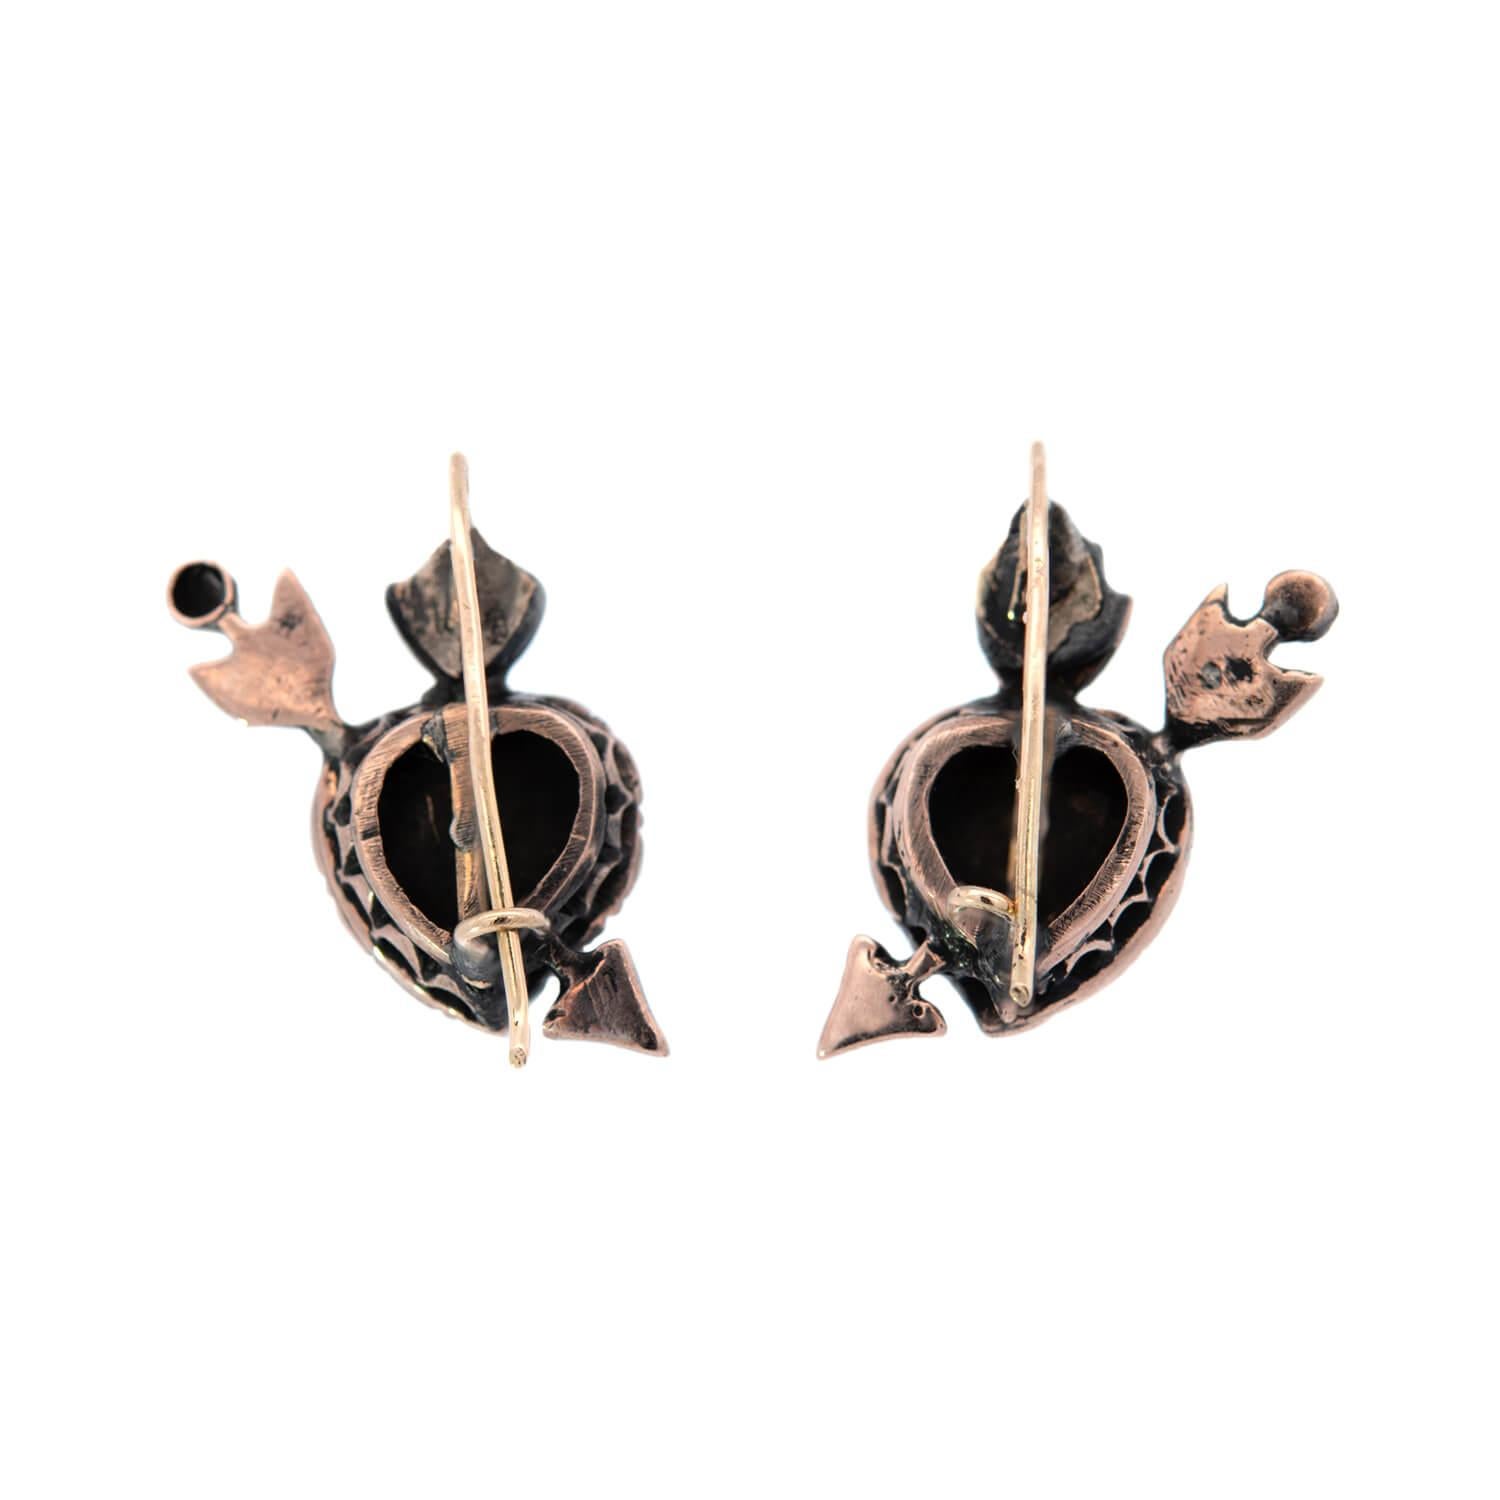 An absolutely exquisite and unusual pair of diamond heart and arrow earrings from the Victorian (ca1880) era! This striking piece, which is crafted in 12kt yellow gold depicts a diamond encrusted heart center with an arrow shooting through the